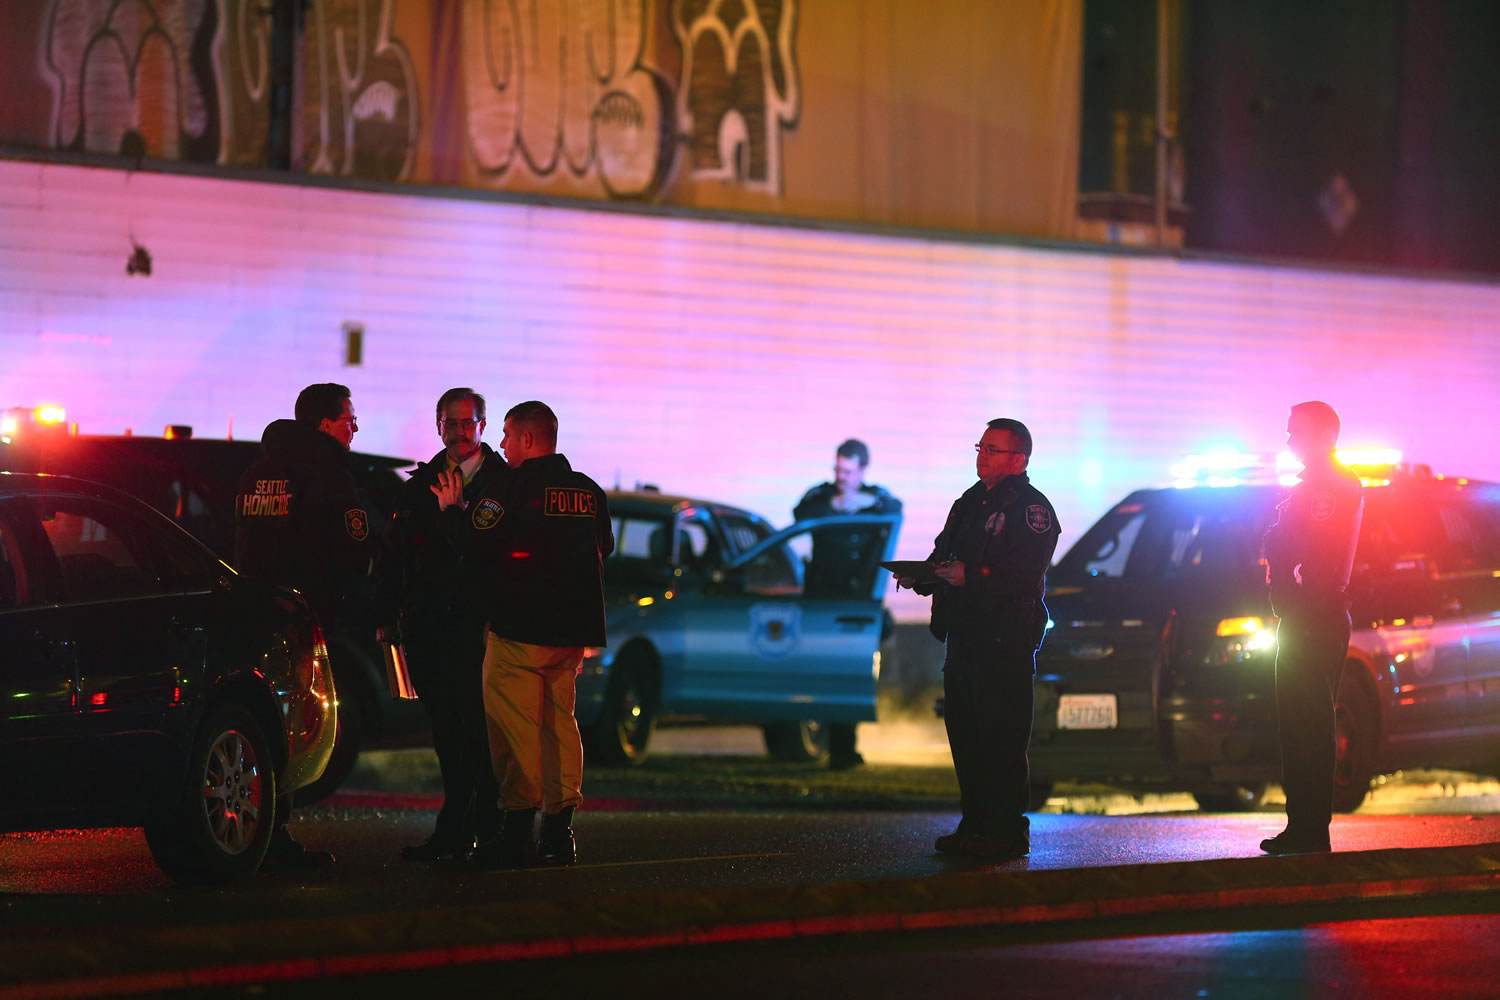 Law enforcement and medics respond to a shooting near Airport Way South and Atlantic Street on Tuesday, Jan. 26, 2015 in Seattle. Police say two people have been fatally shot and three others wounded by gunfire at a homeless encampment.